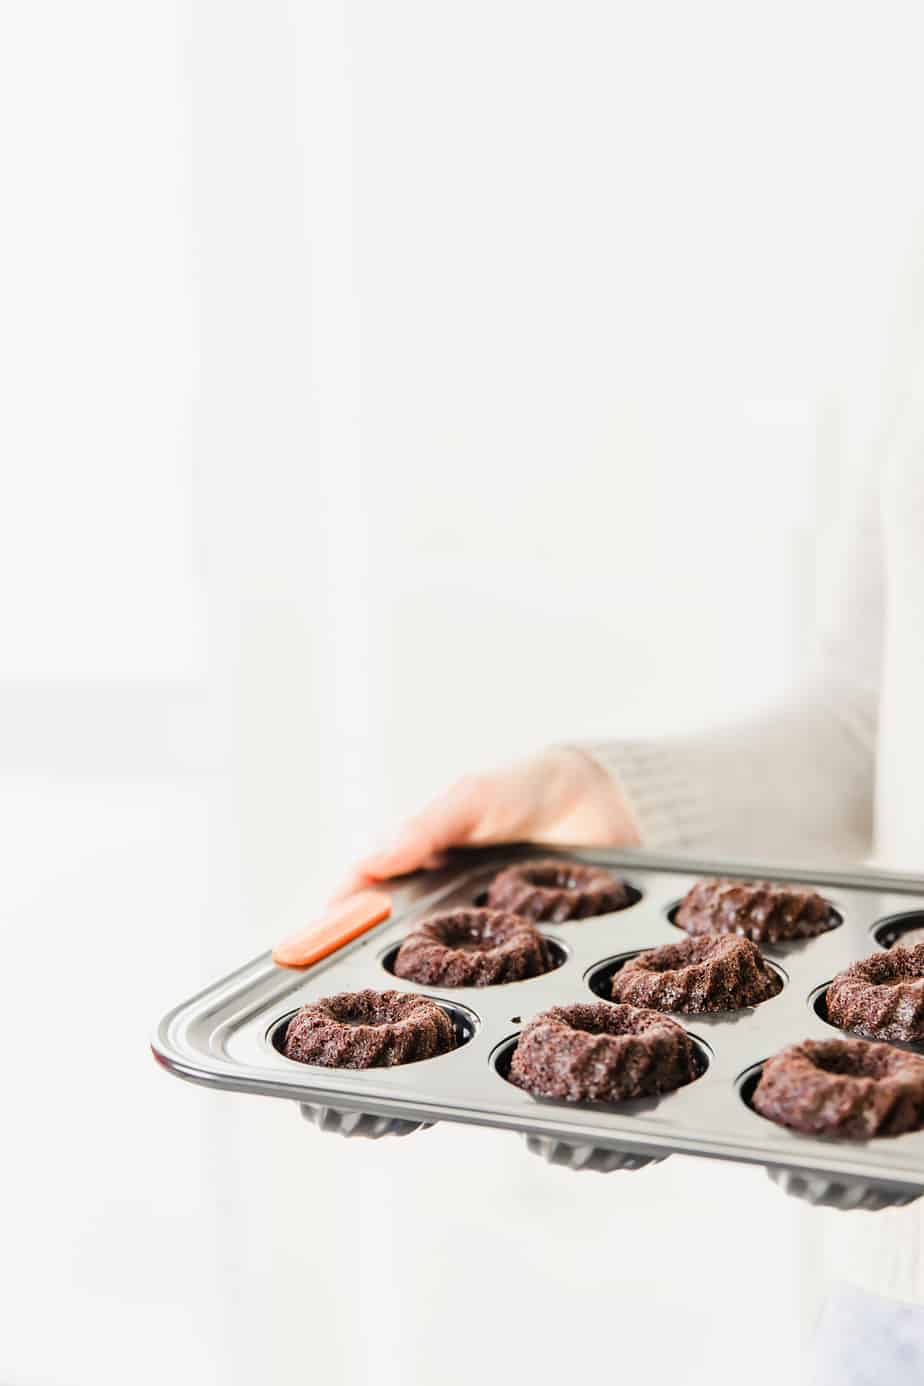 A person holding a tray of chocolate mini bundt cakes.